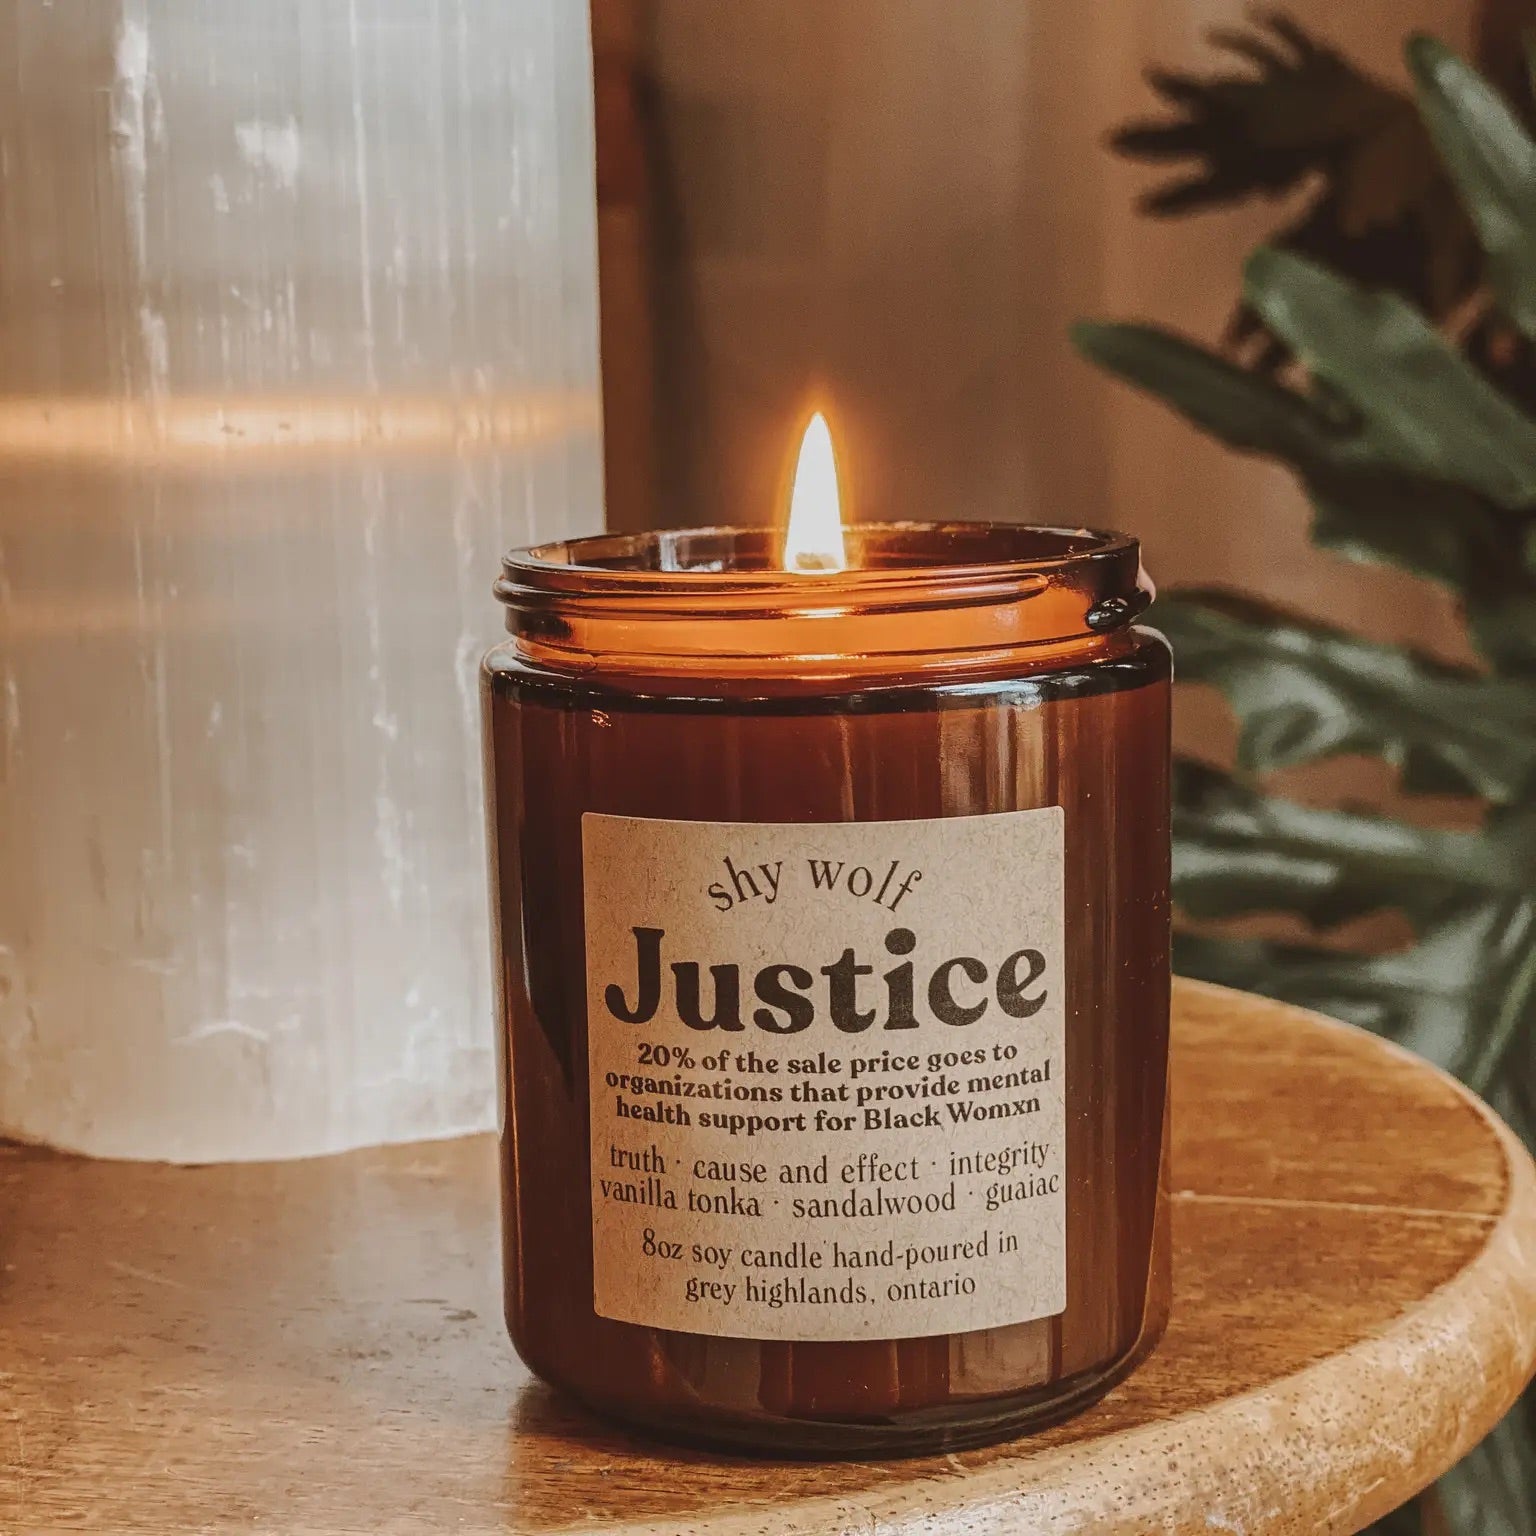 Justice Soy Candle for Charity - Vanilla, Sandalwood